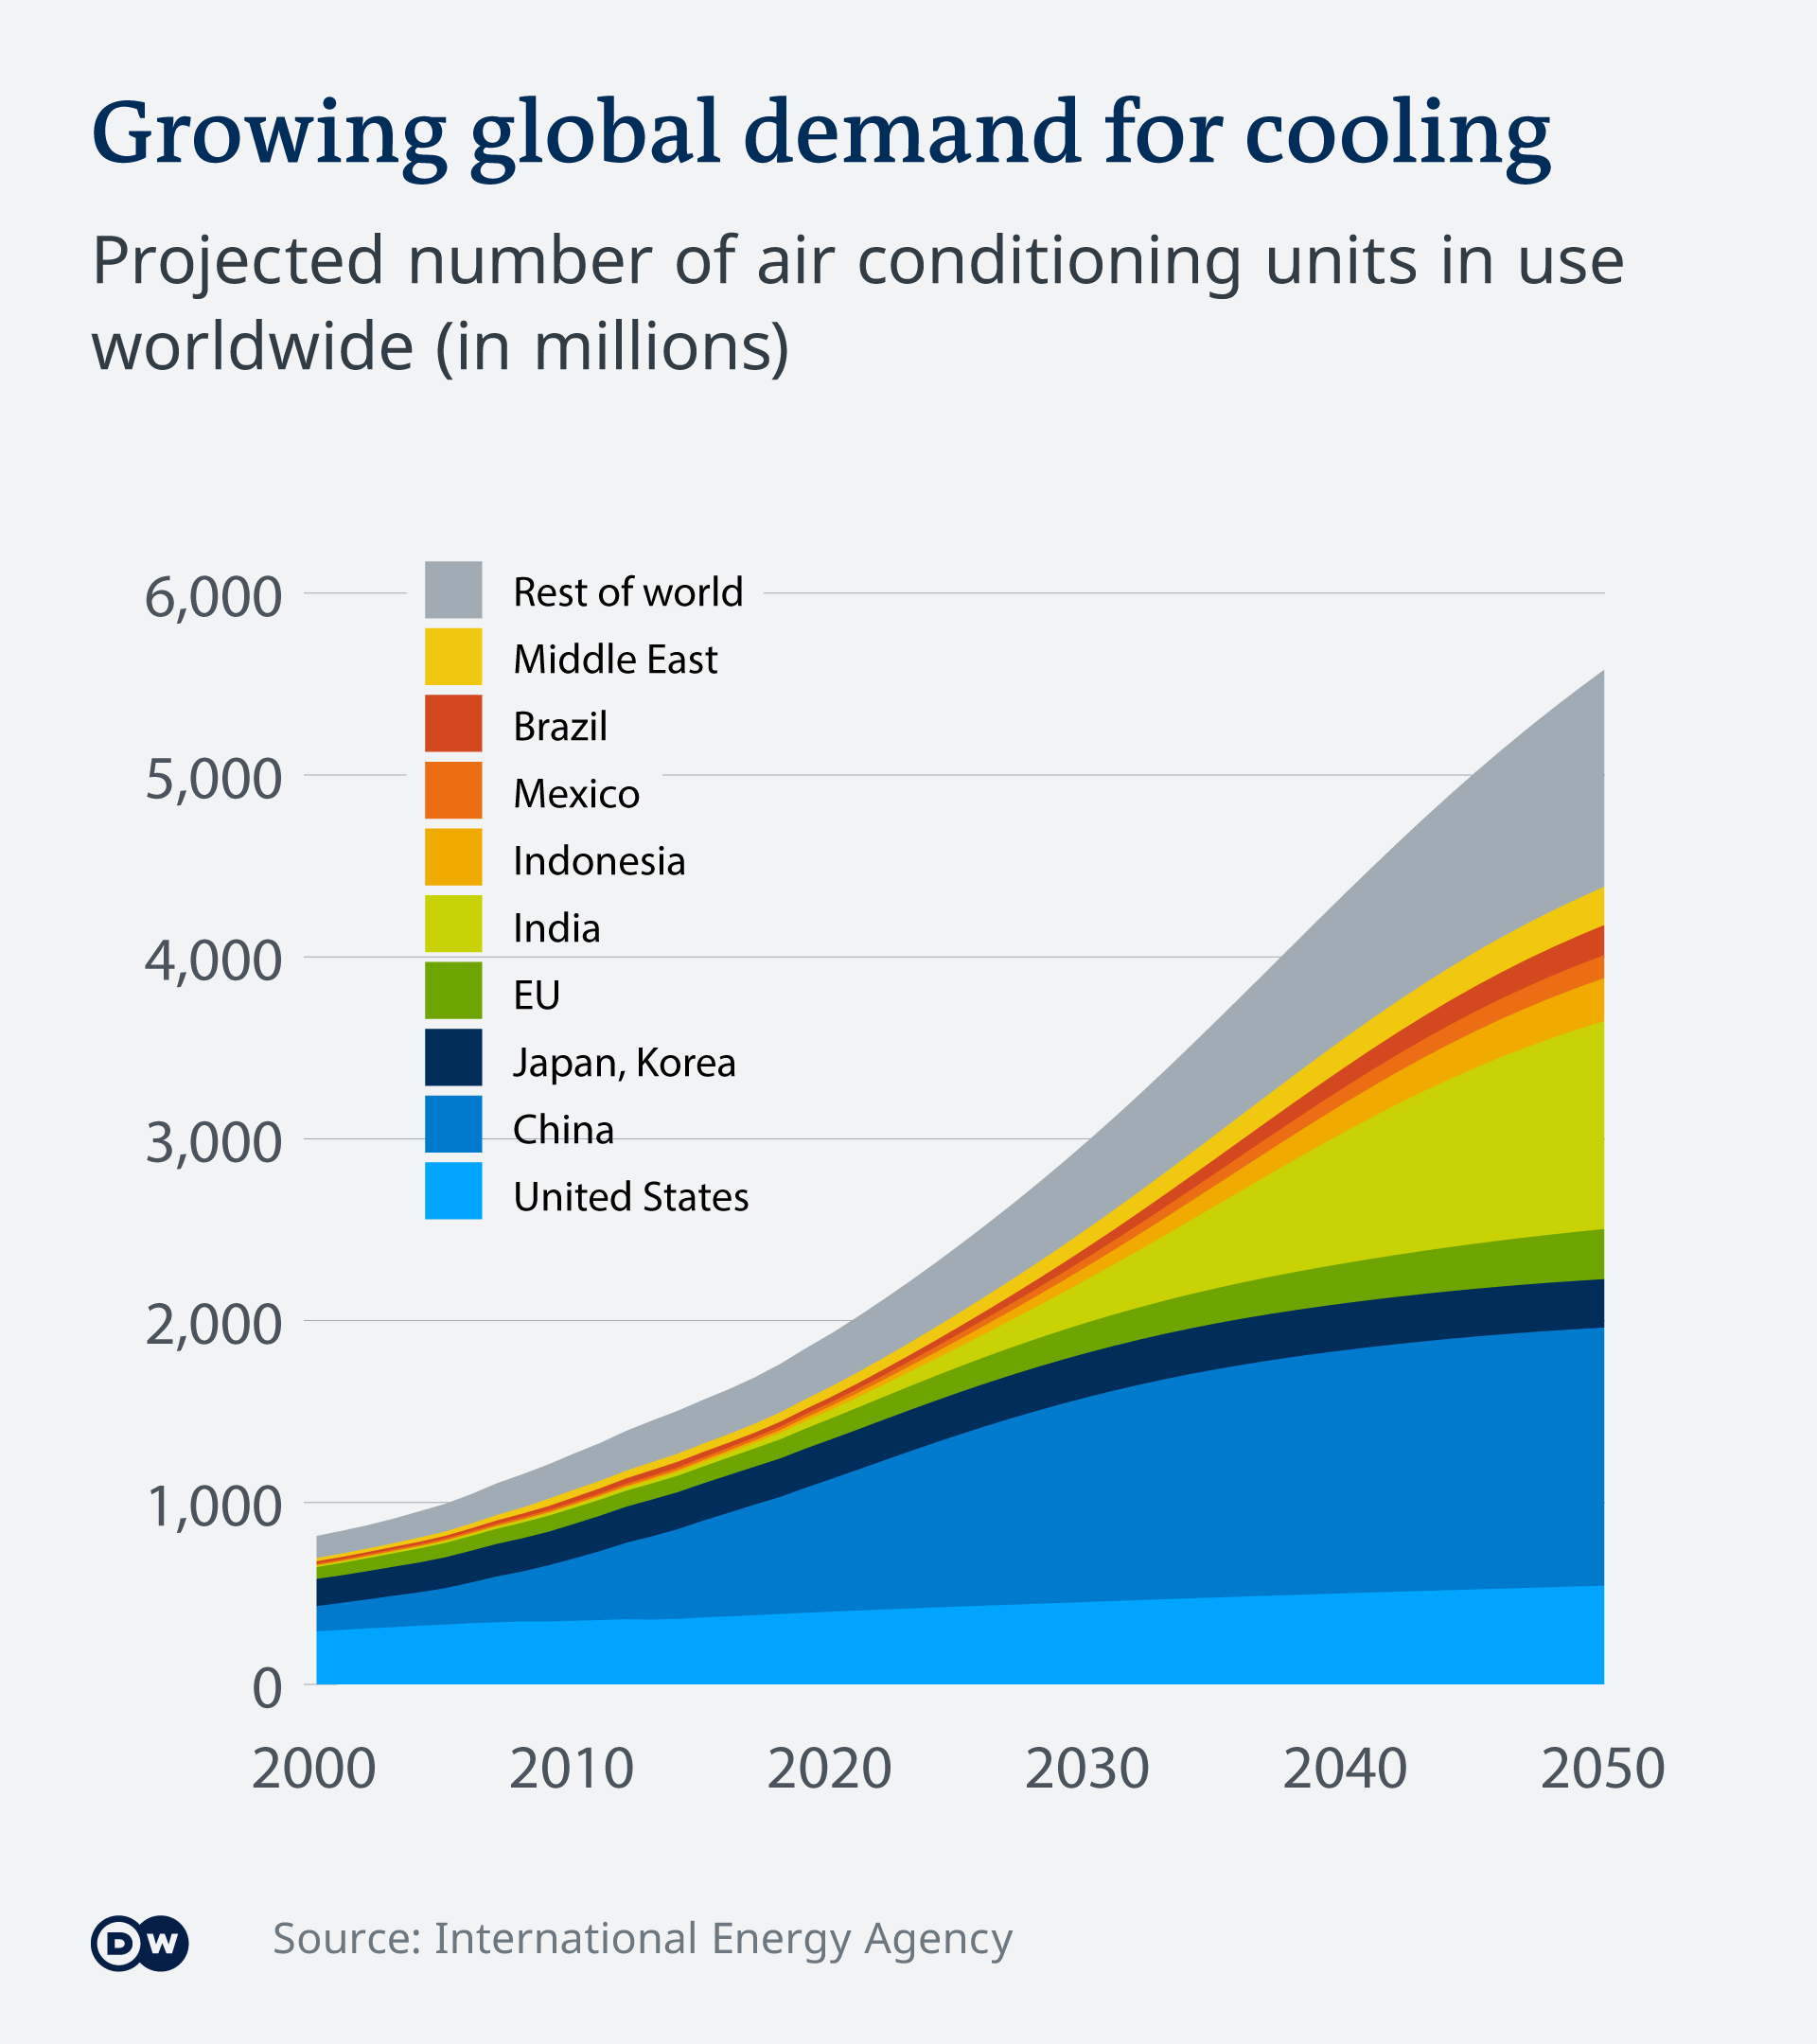 An infographic showing the projected growth in demand for air conditioners until 2050